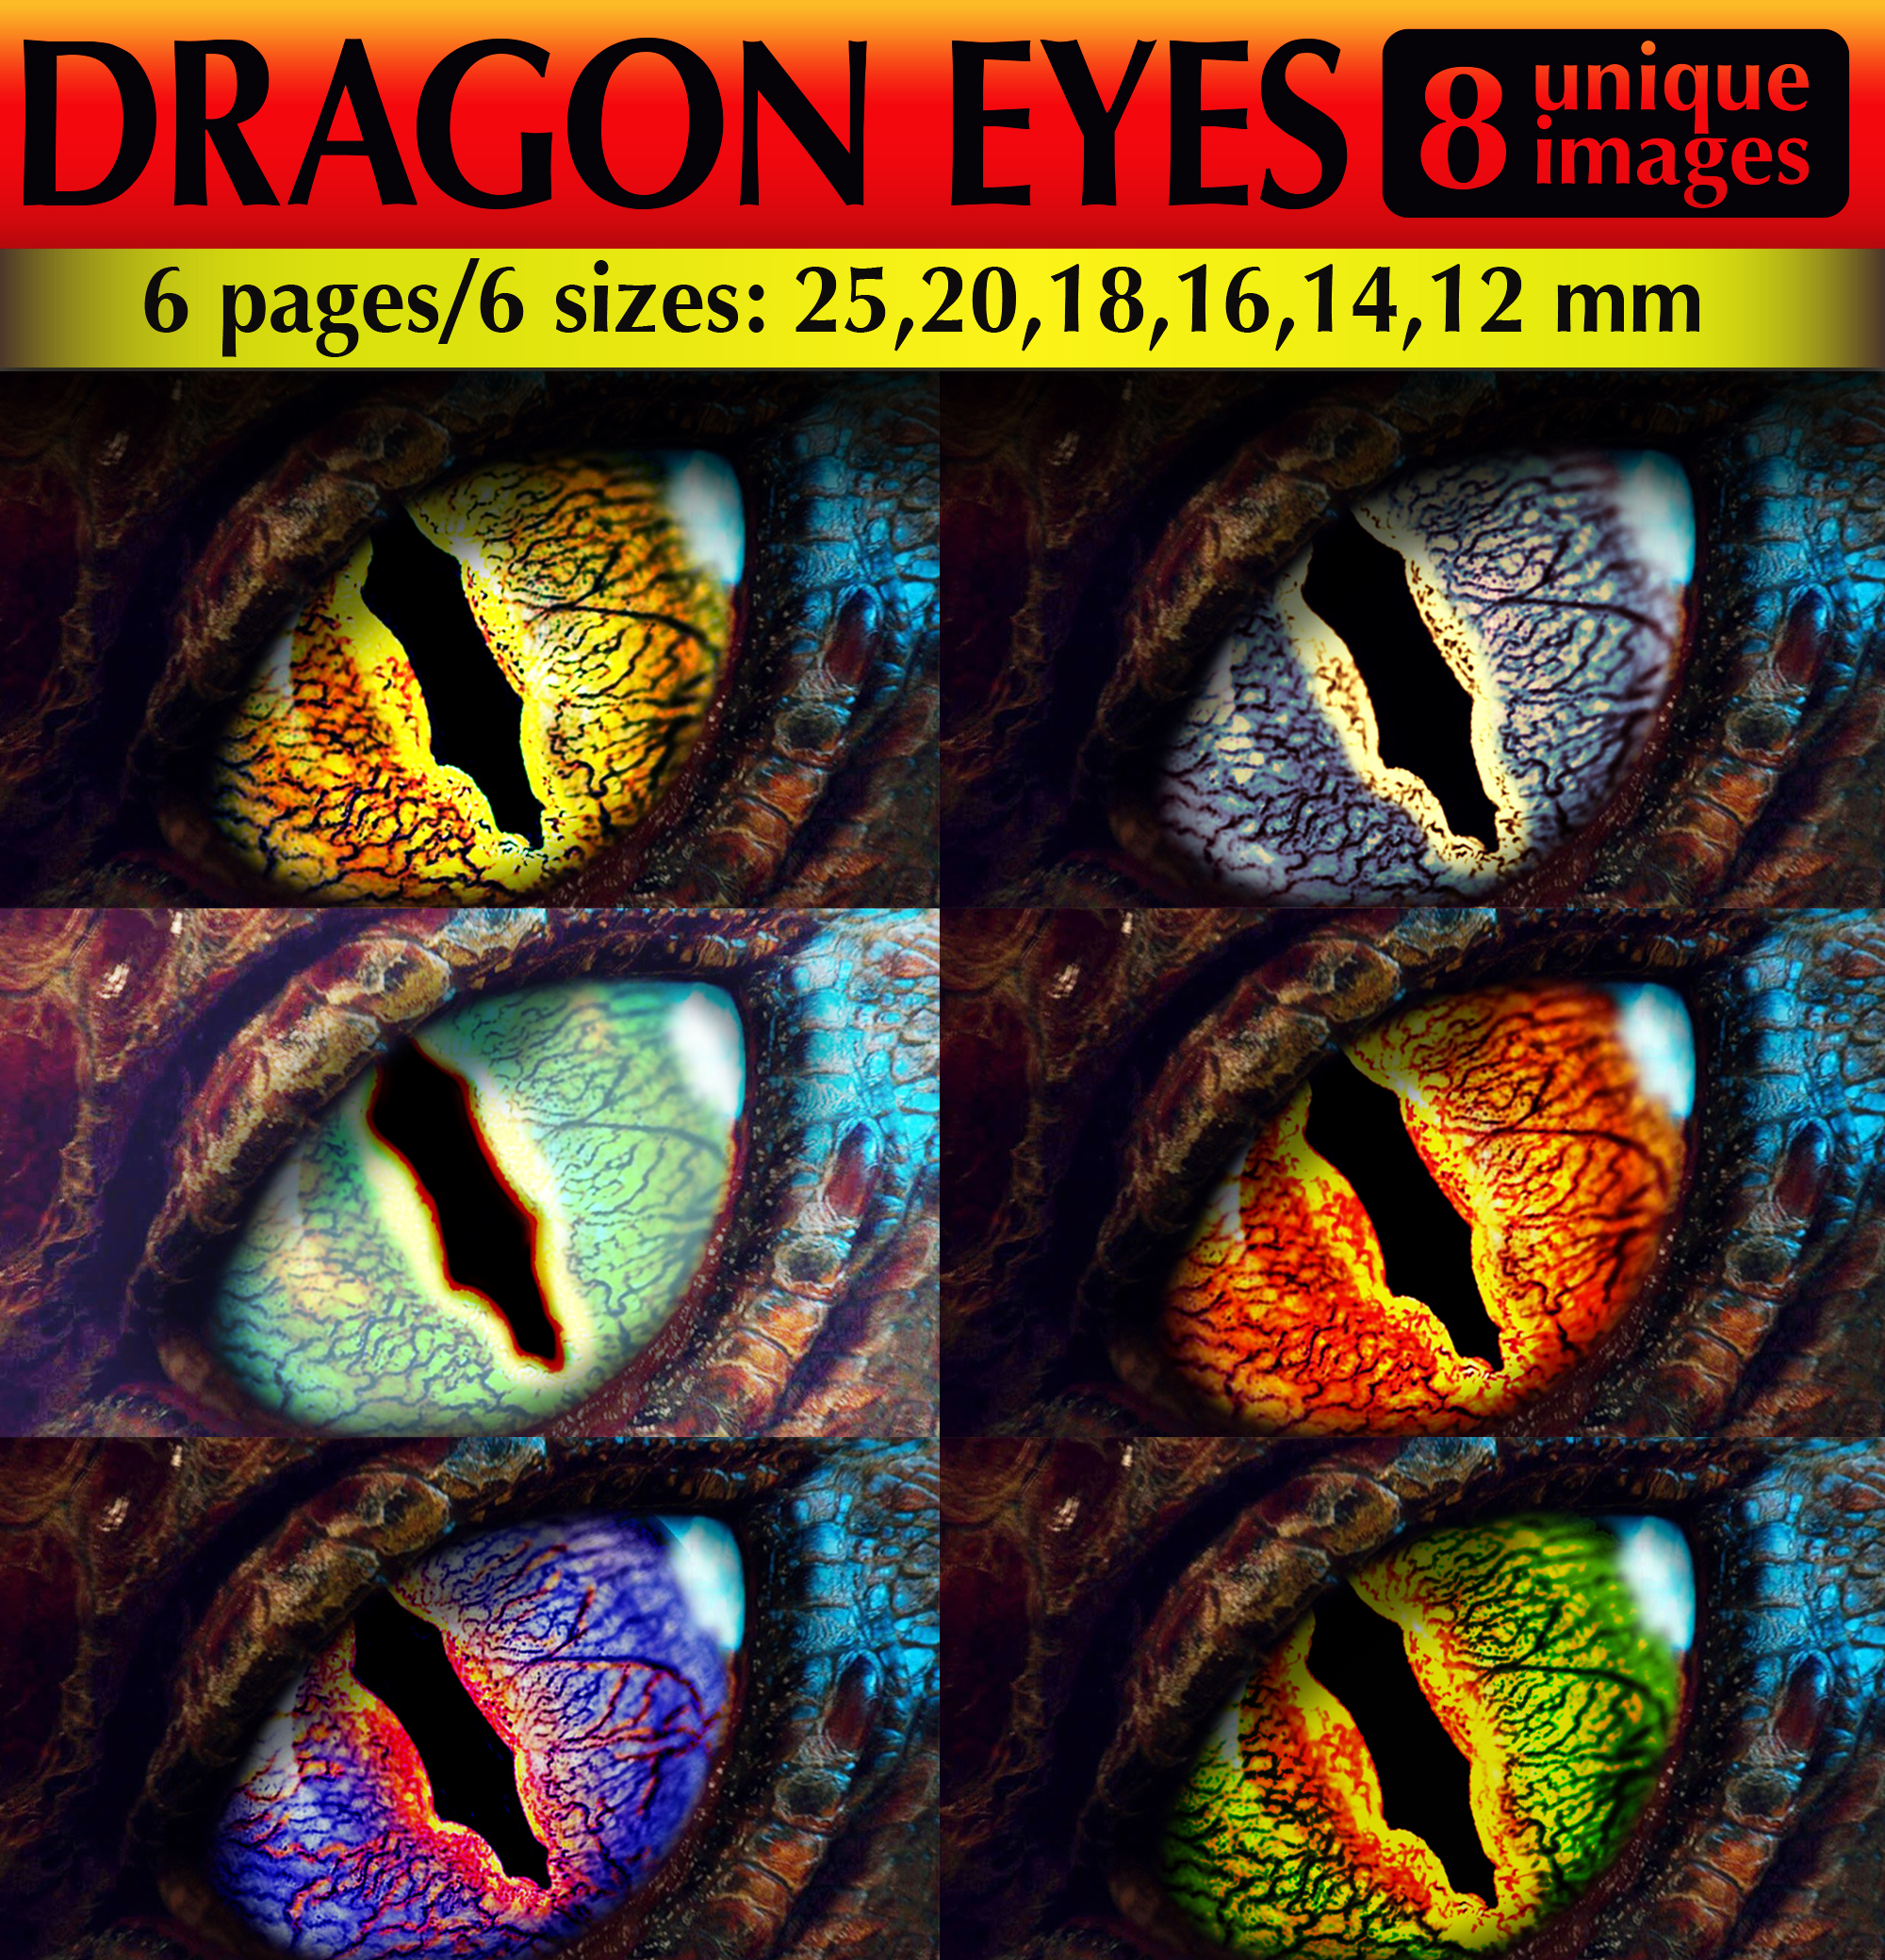 Dragon Eyes Digital Collage Sheet from 12mm to 25mm - DailyDoll Shop